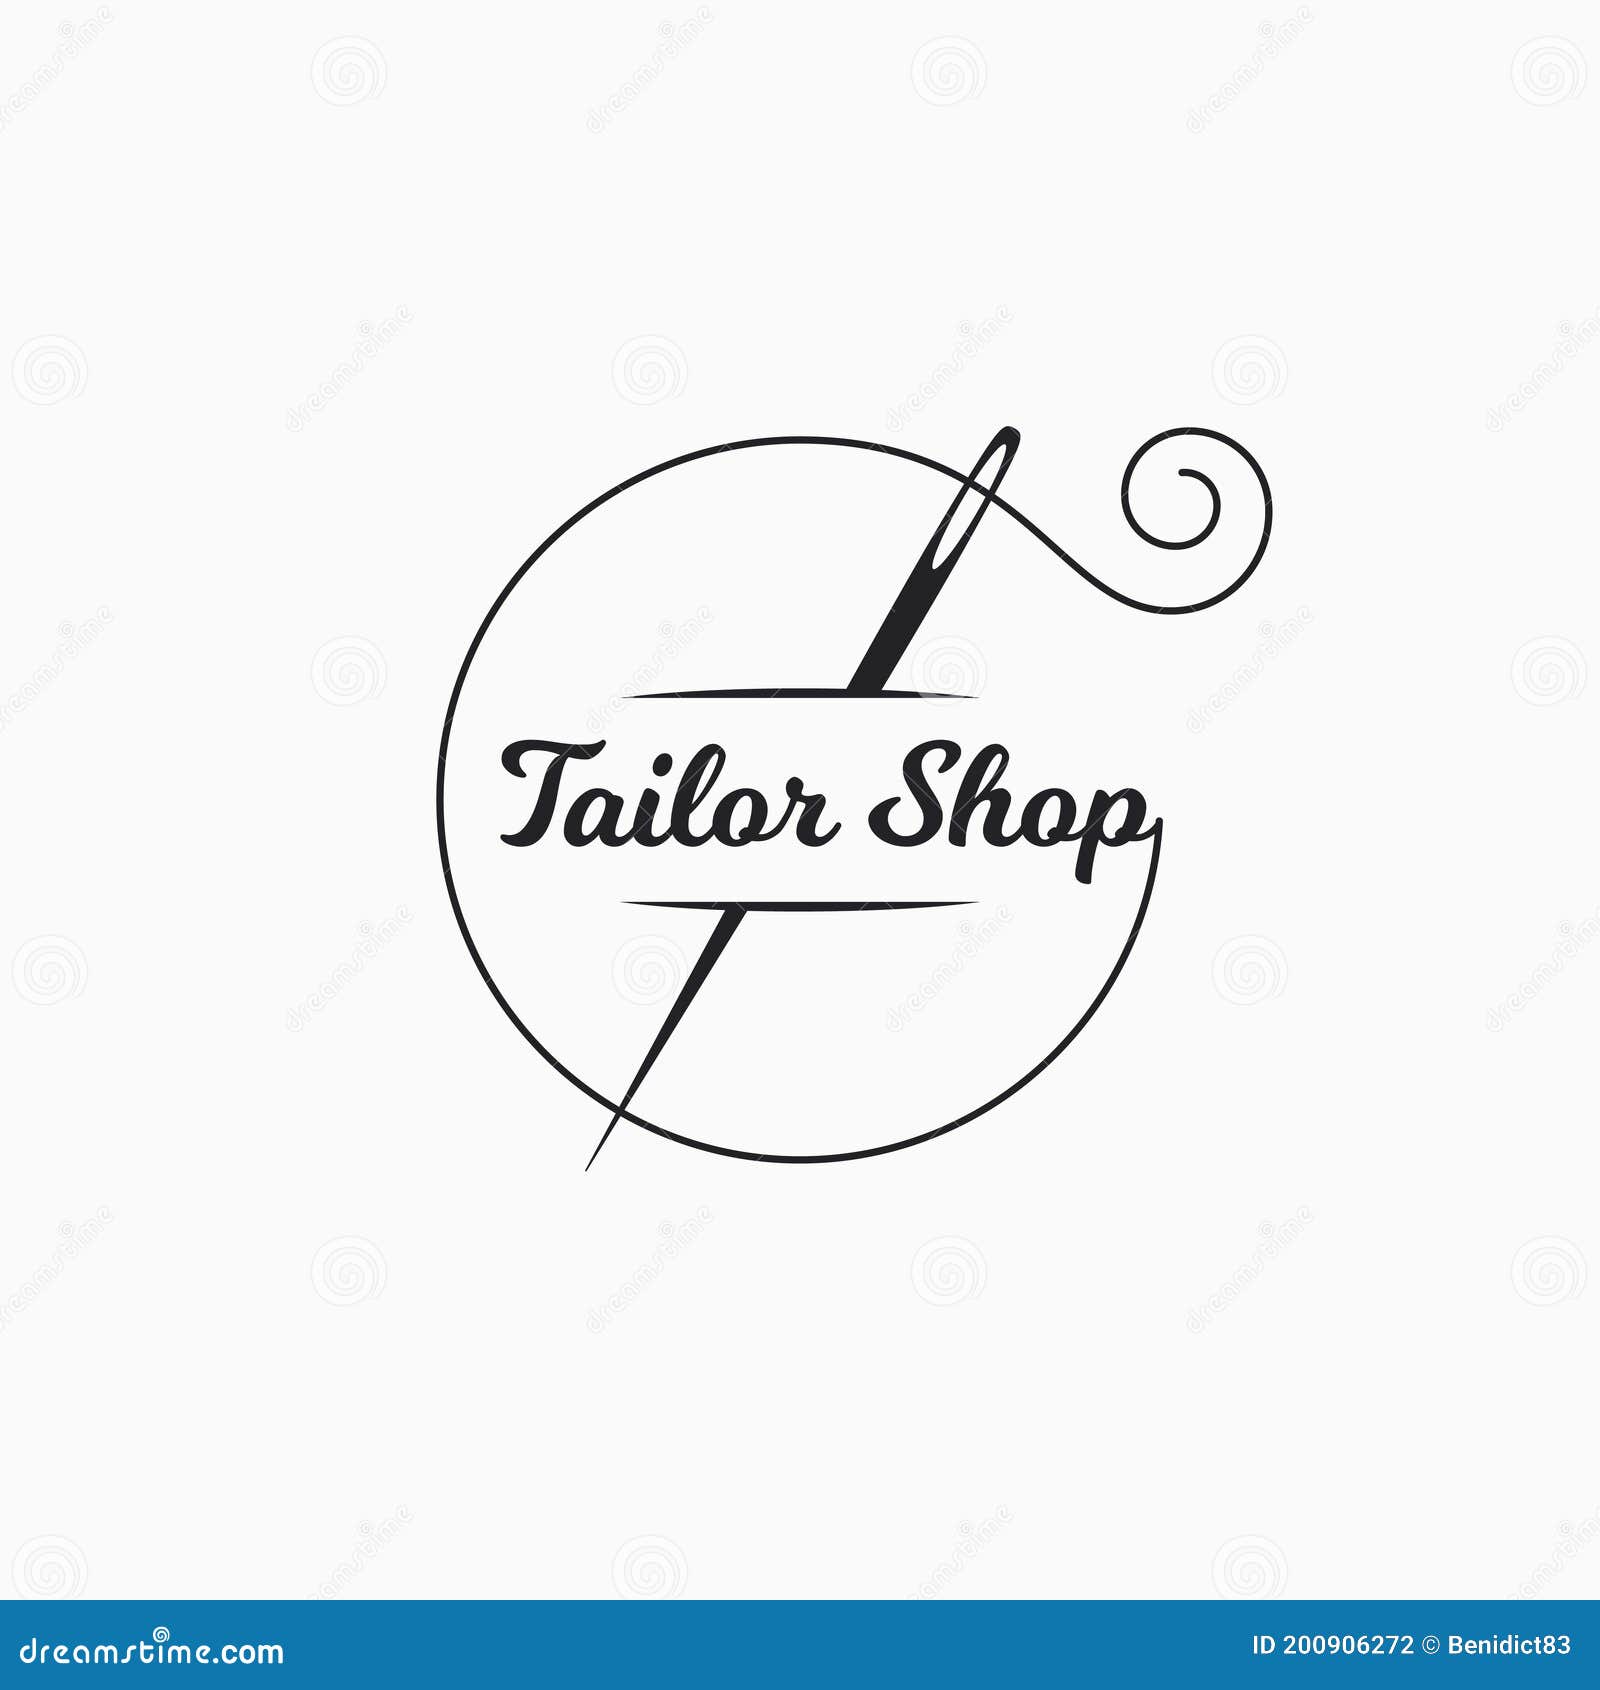 sewing needle logo. tailor shop with thread